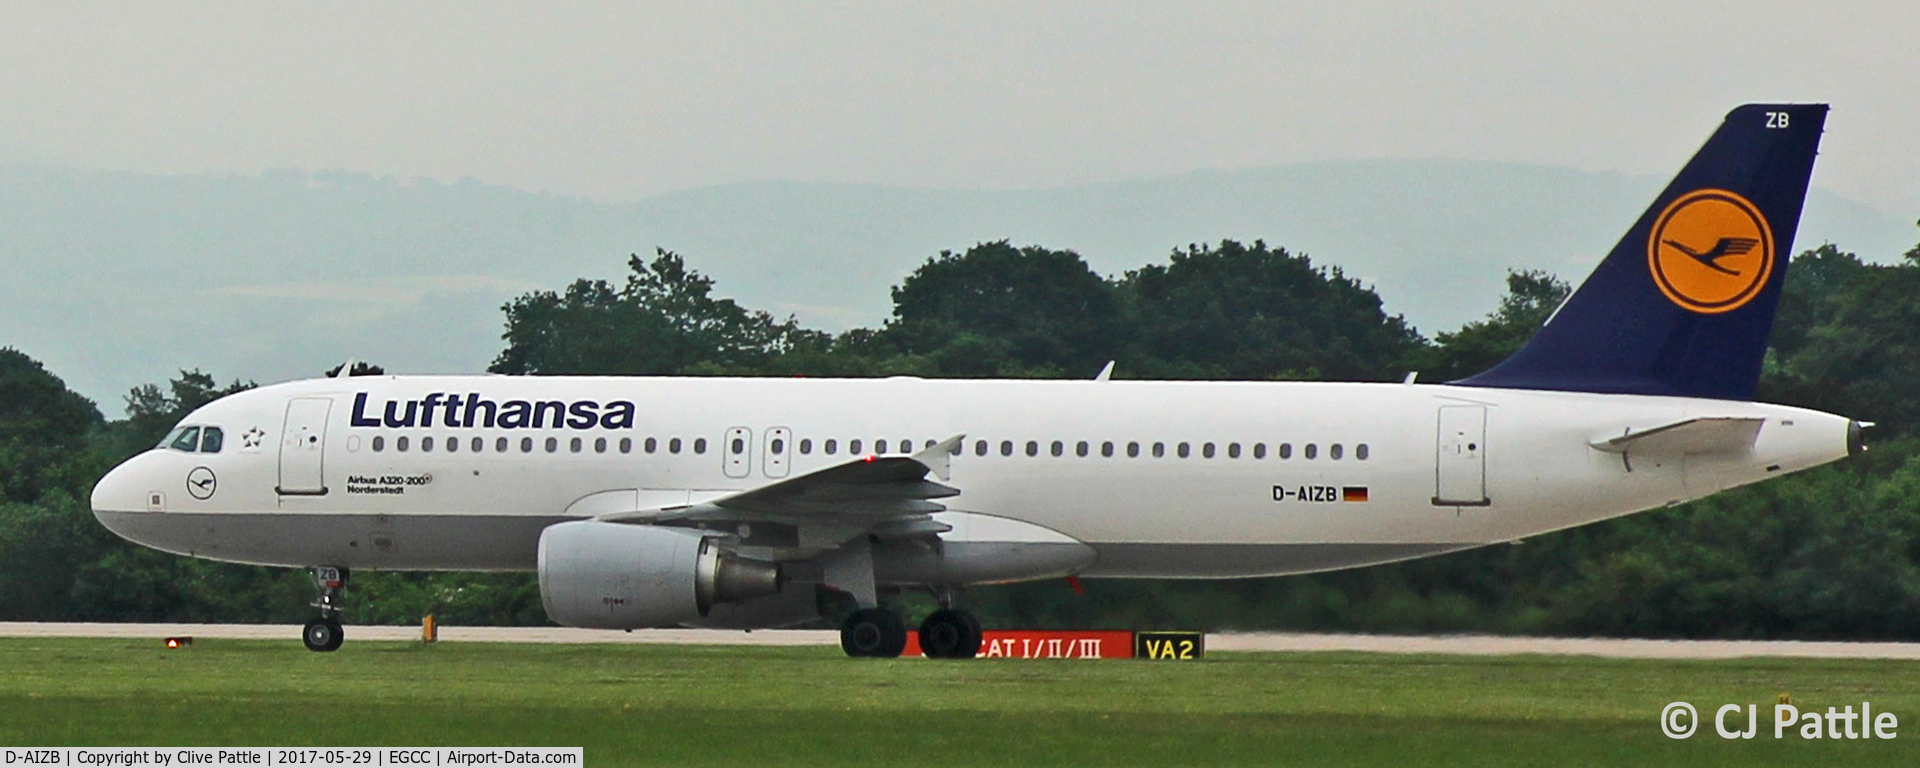 D-AIZB, 2009 Airbus A320-214 C/N 4120, Pictured at Manchester EGCC